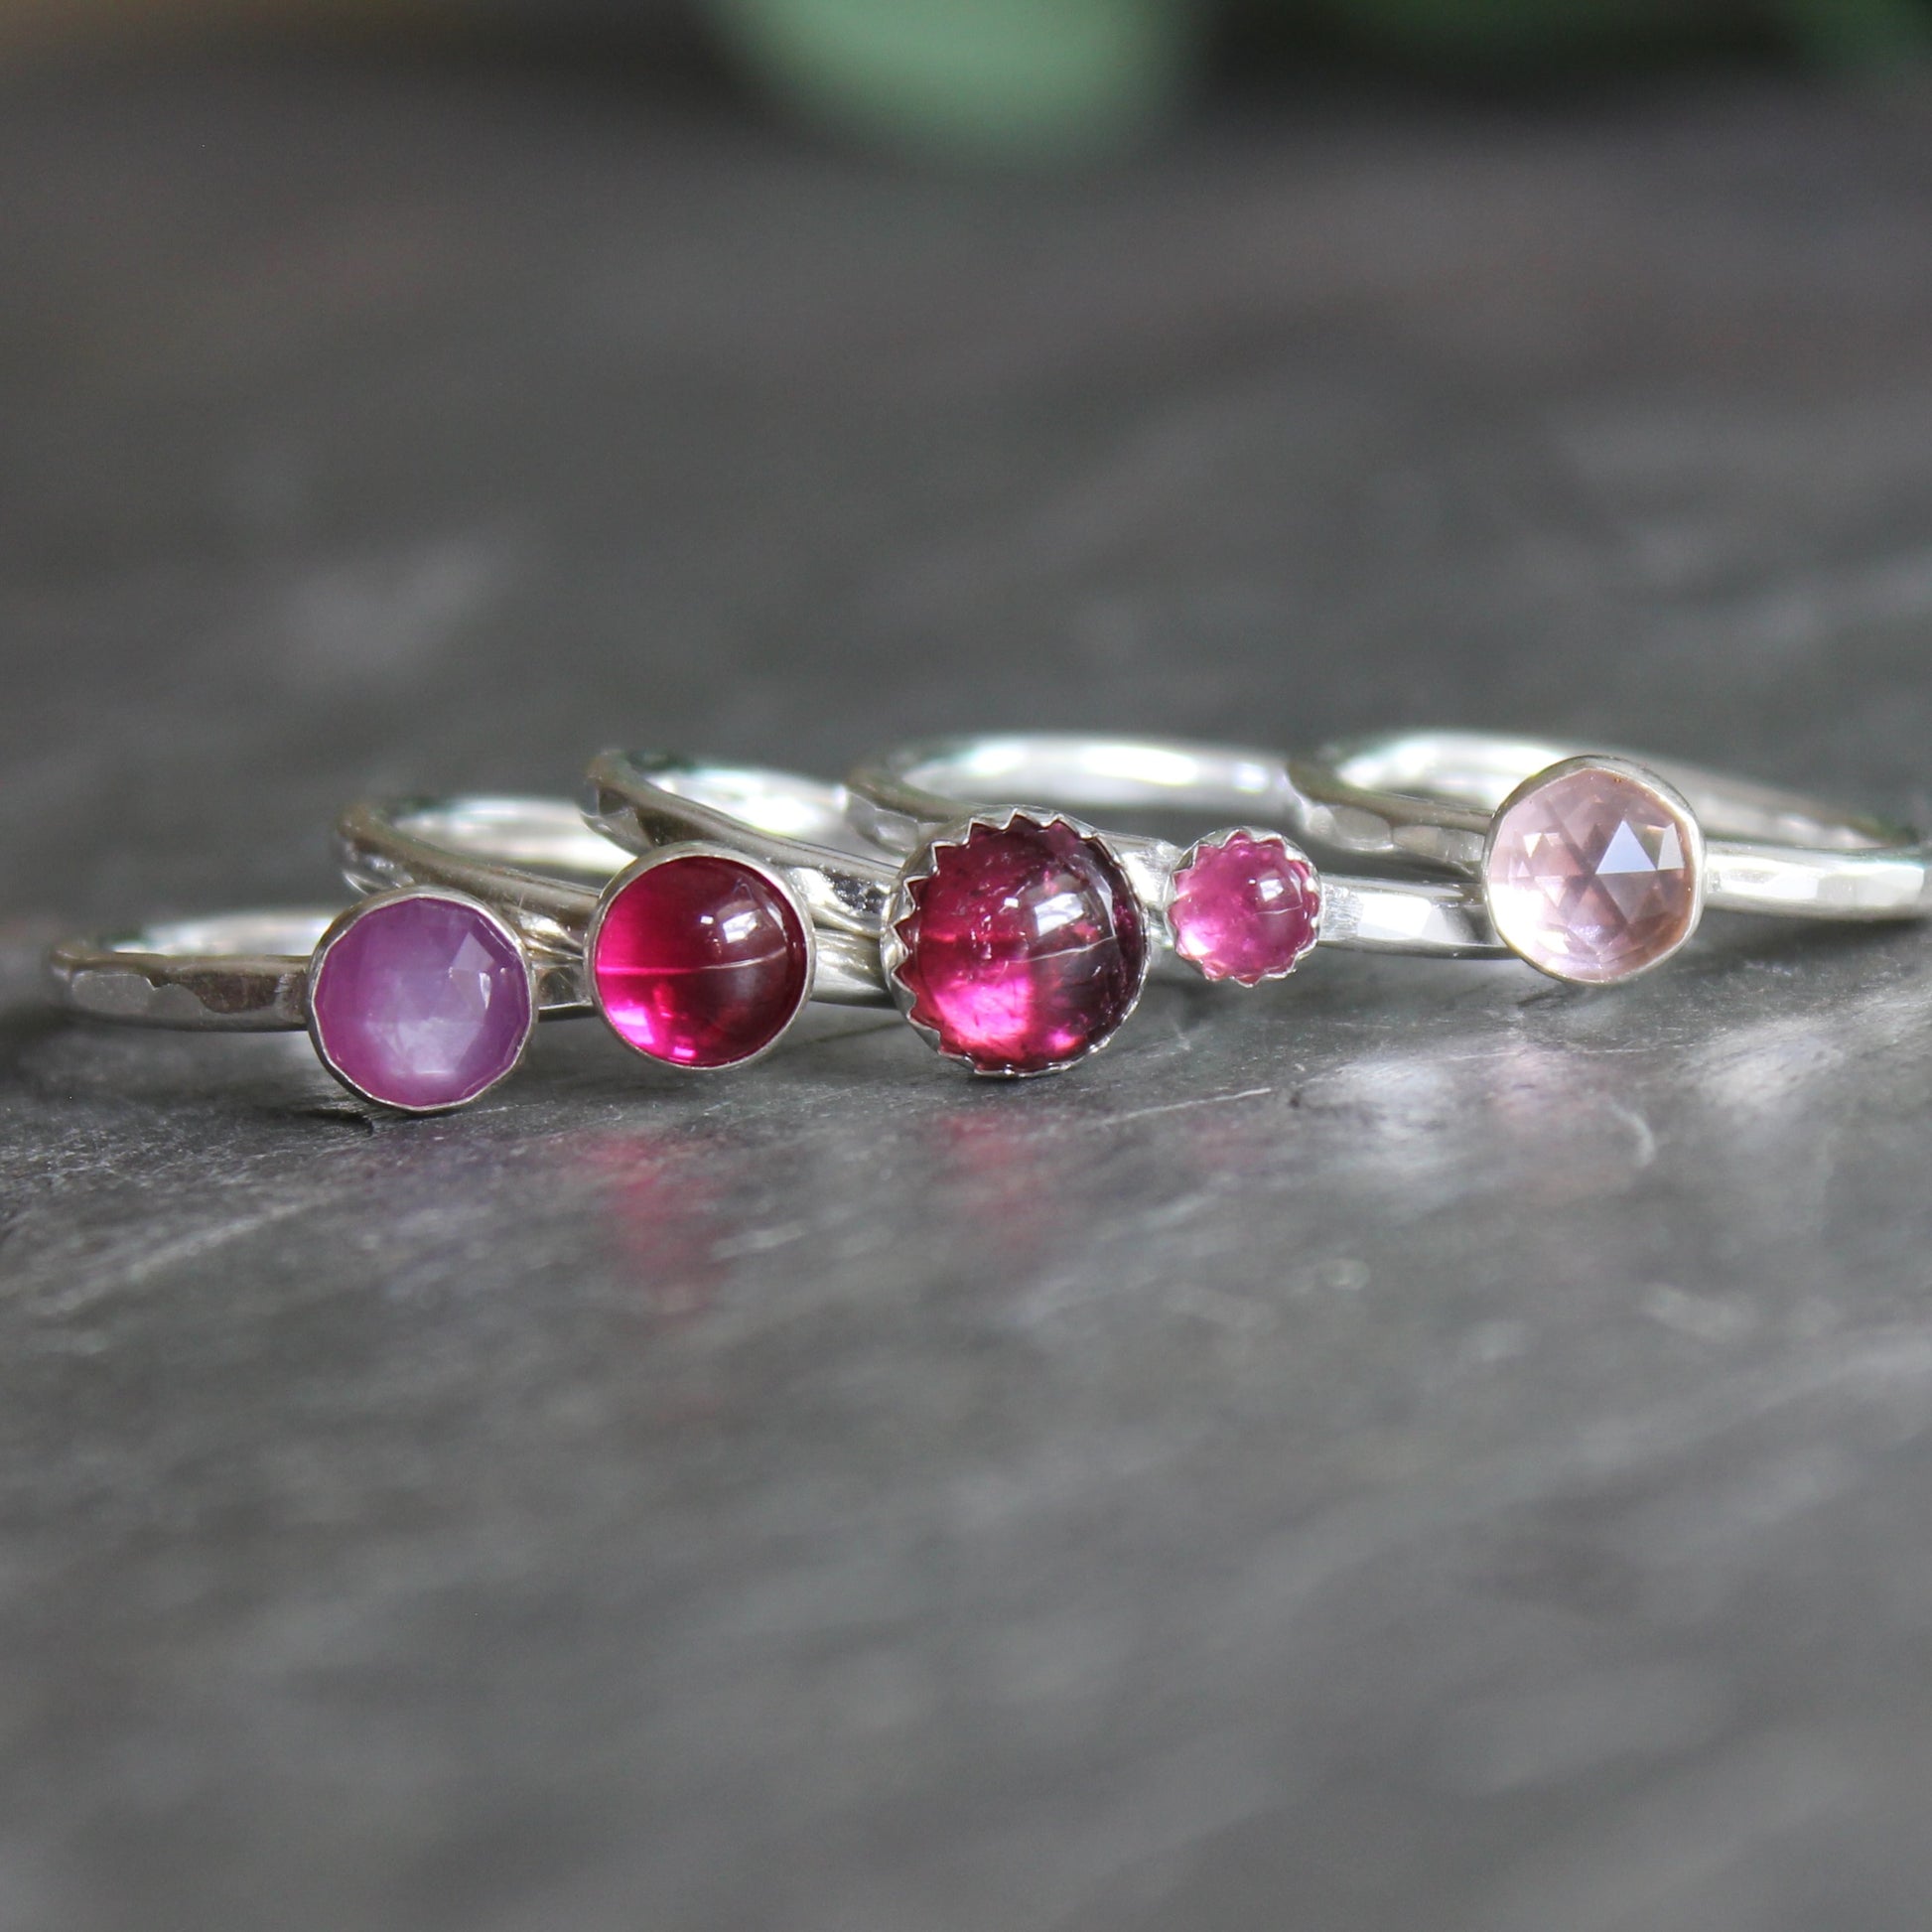 Stacking Rings Left to Right:  Pink Silk Sapphire, Lab Created Ruby x 2, Tiny Pink Tourmaline, Pale Pink Morganite